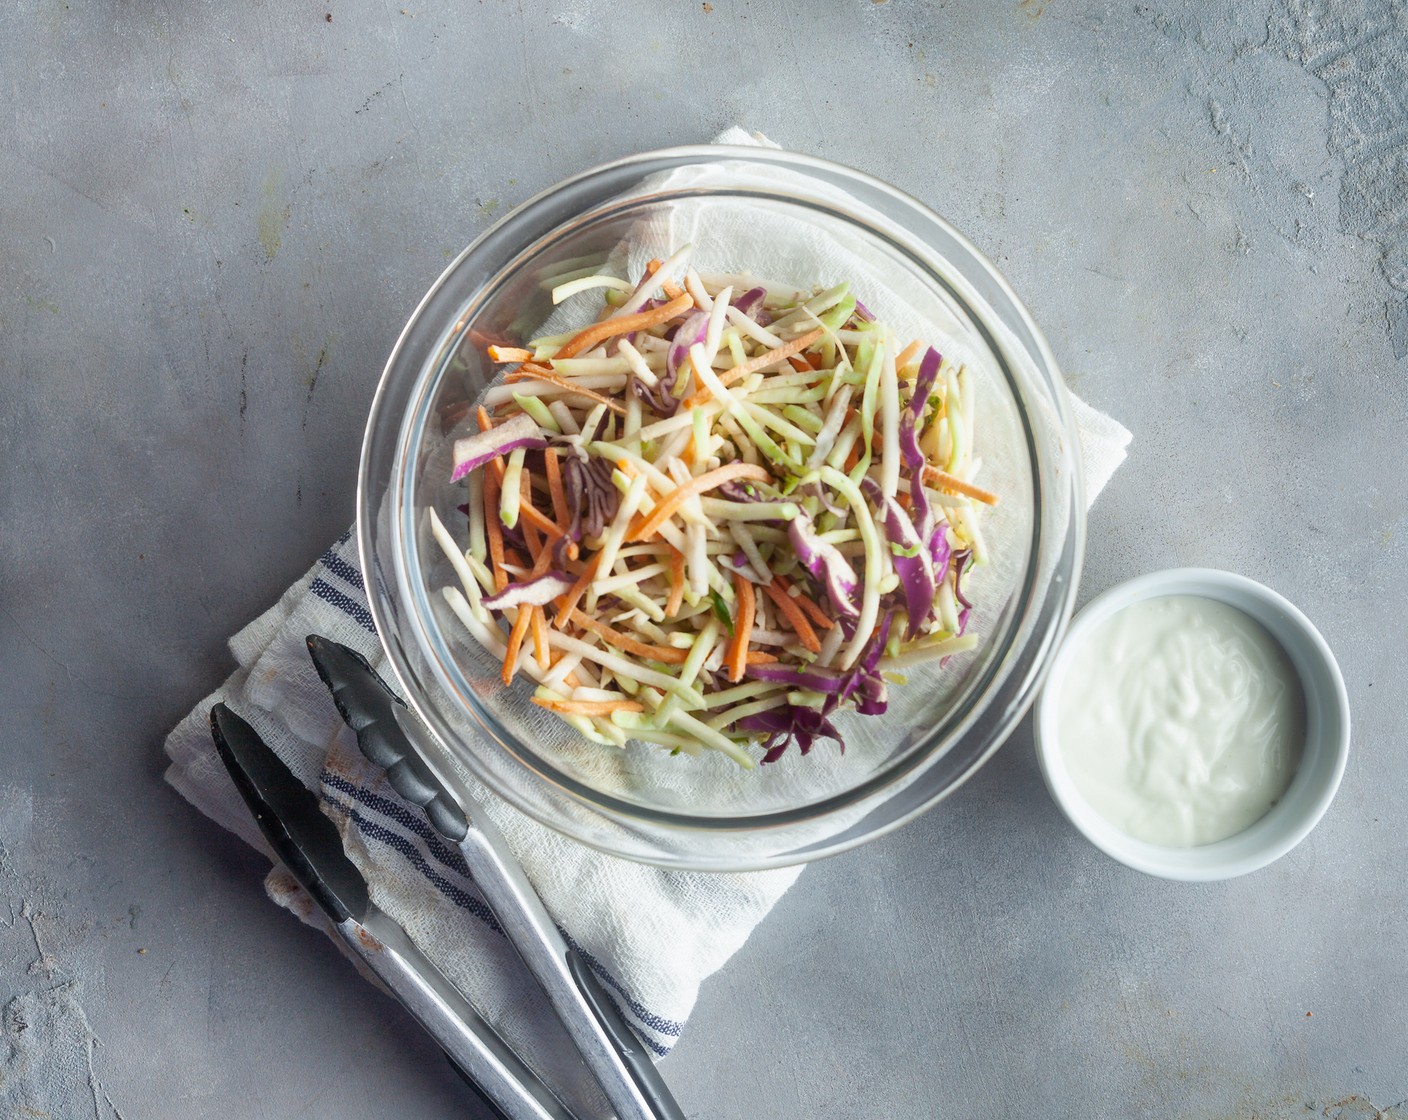 step 4 In a mixing bowl, combine the Coleslaw Mix (1 bag) with the Chunky Blue Cheese Dressing (1/4 cup).